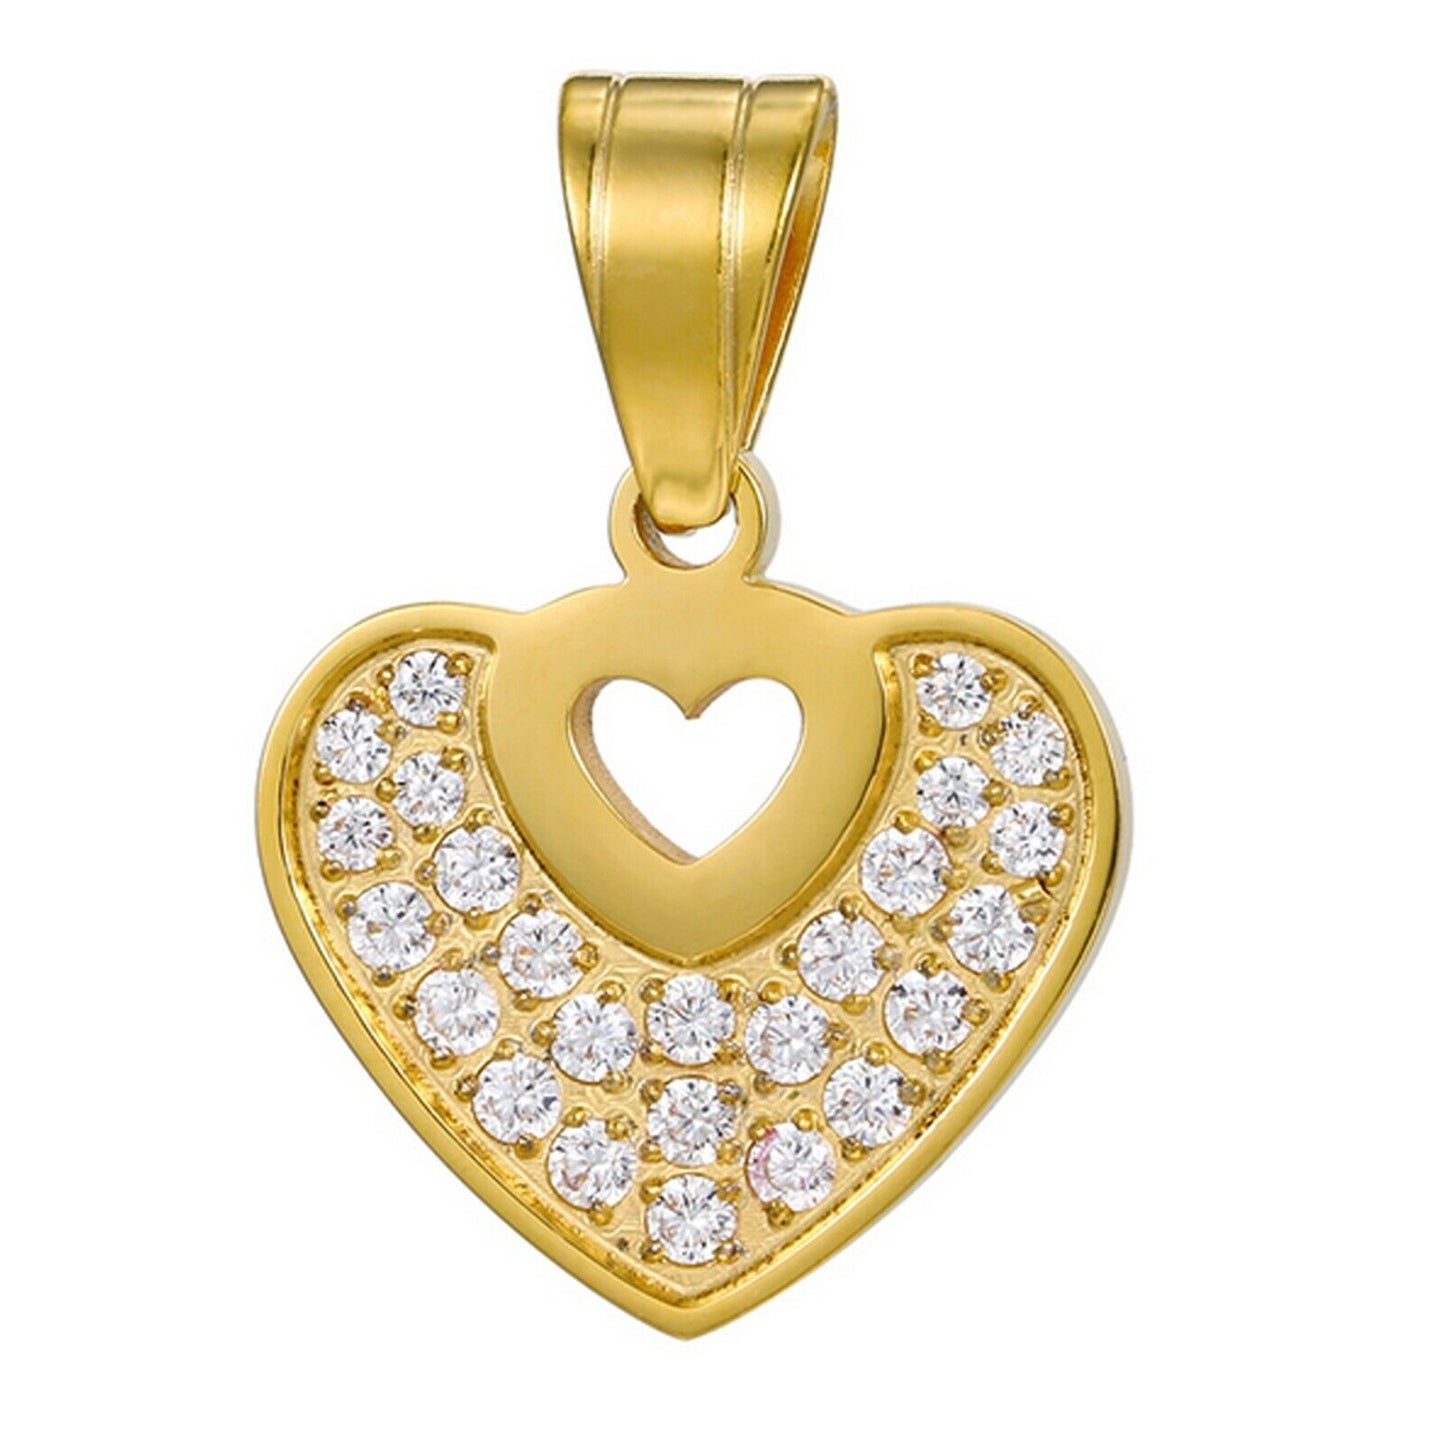 Necklaces - Stainless Steel Gold Plated. Heart Pendant & Chain